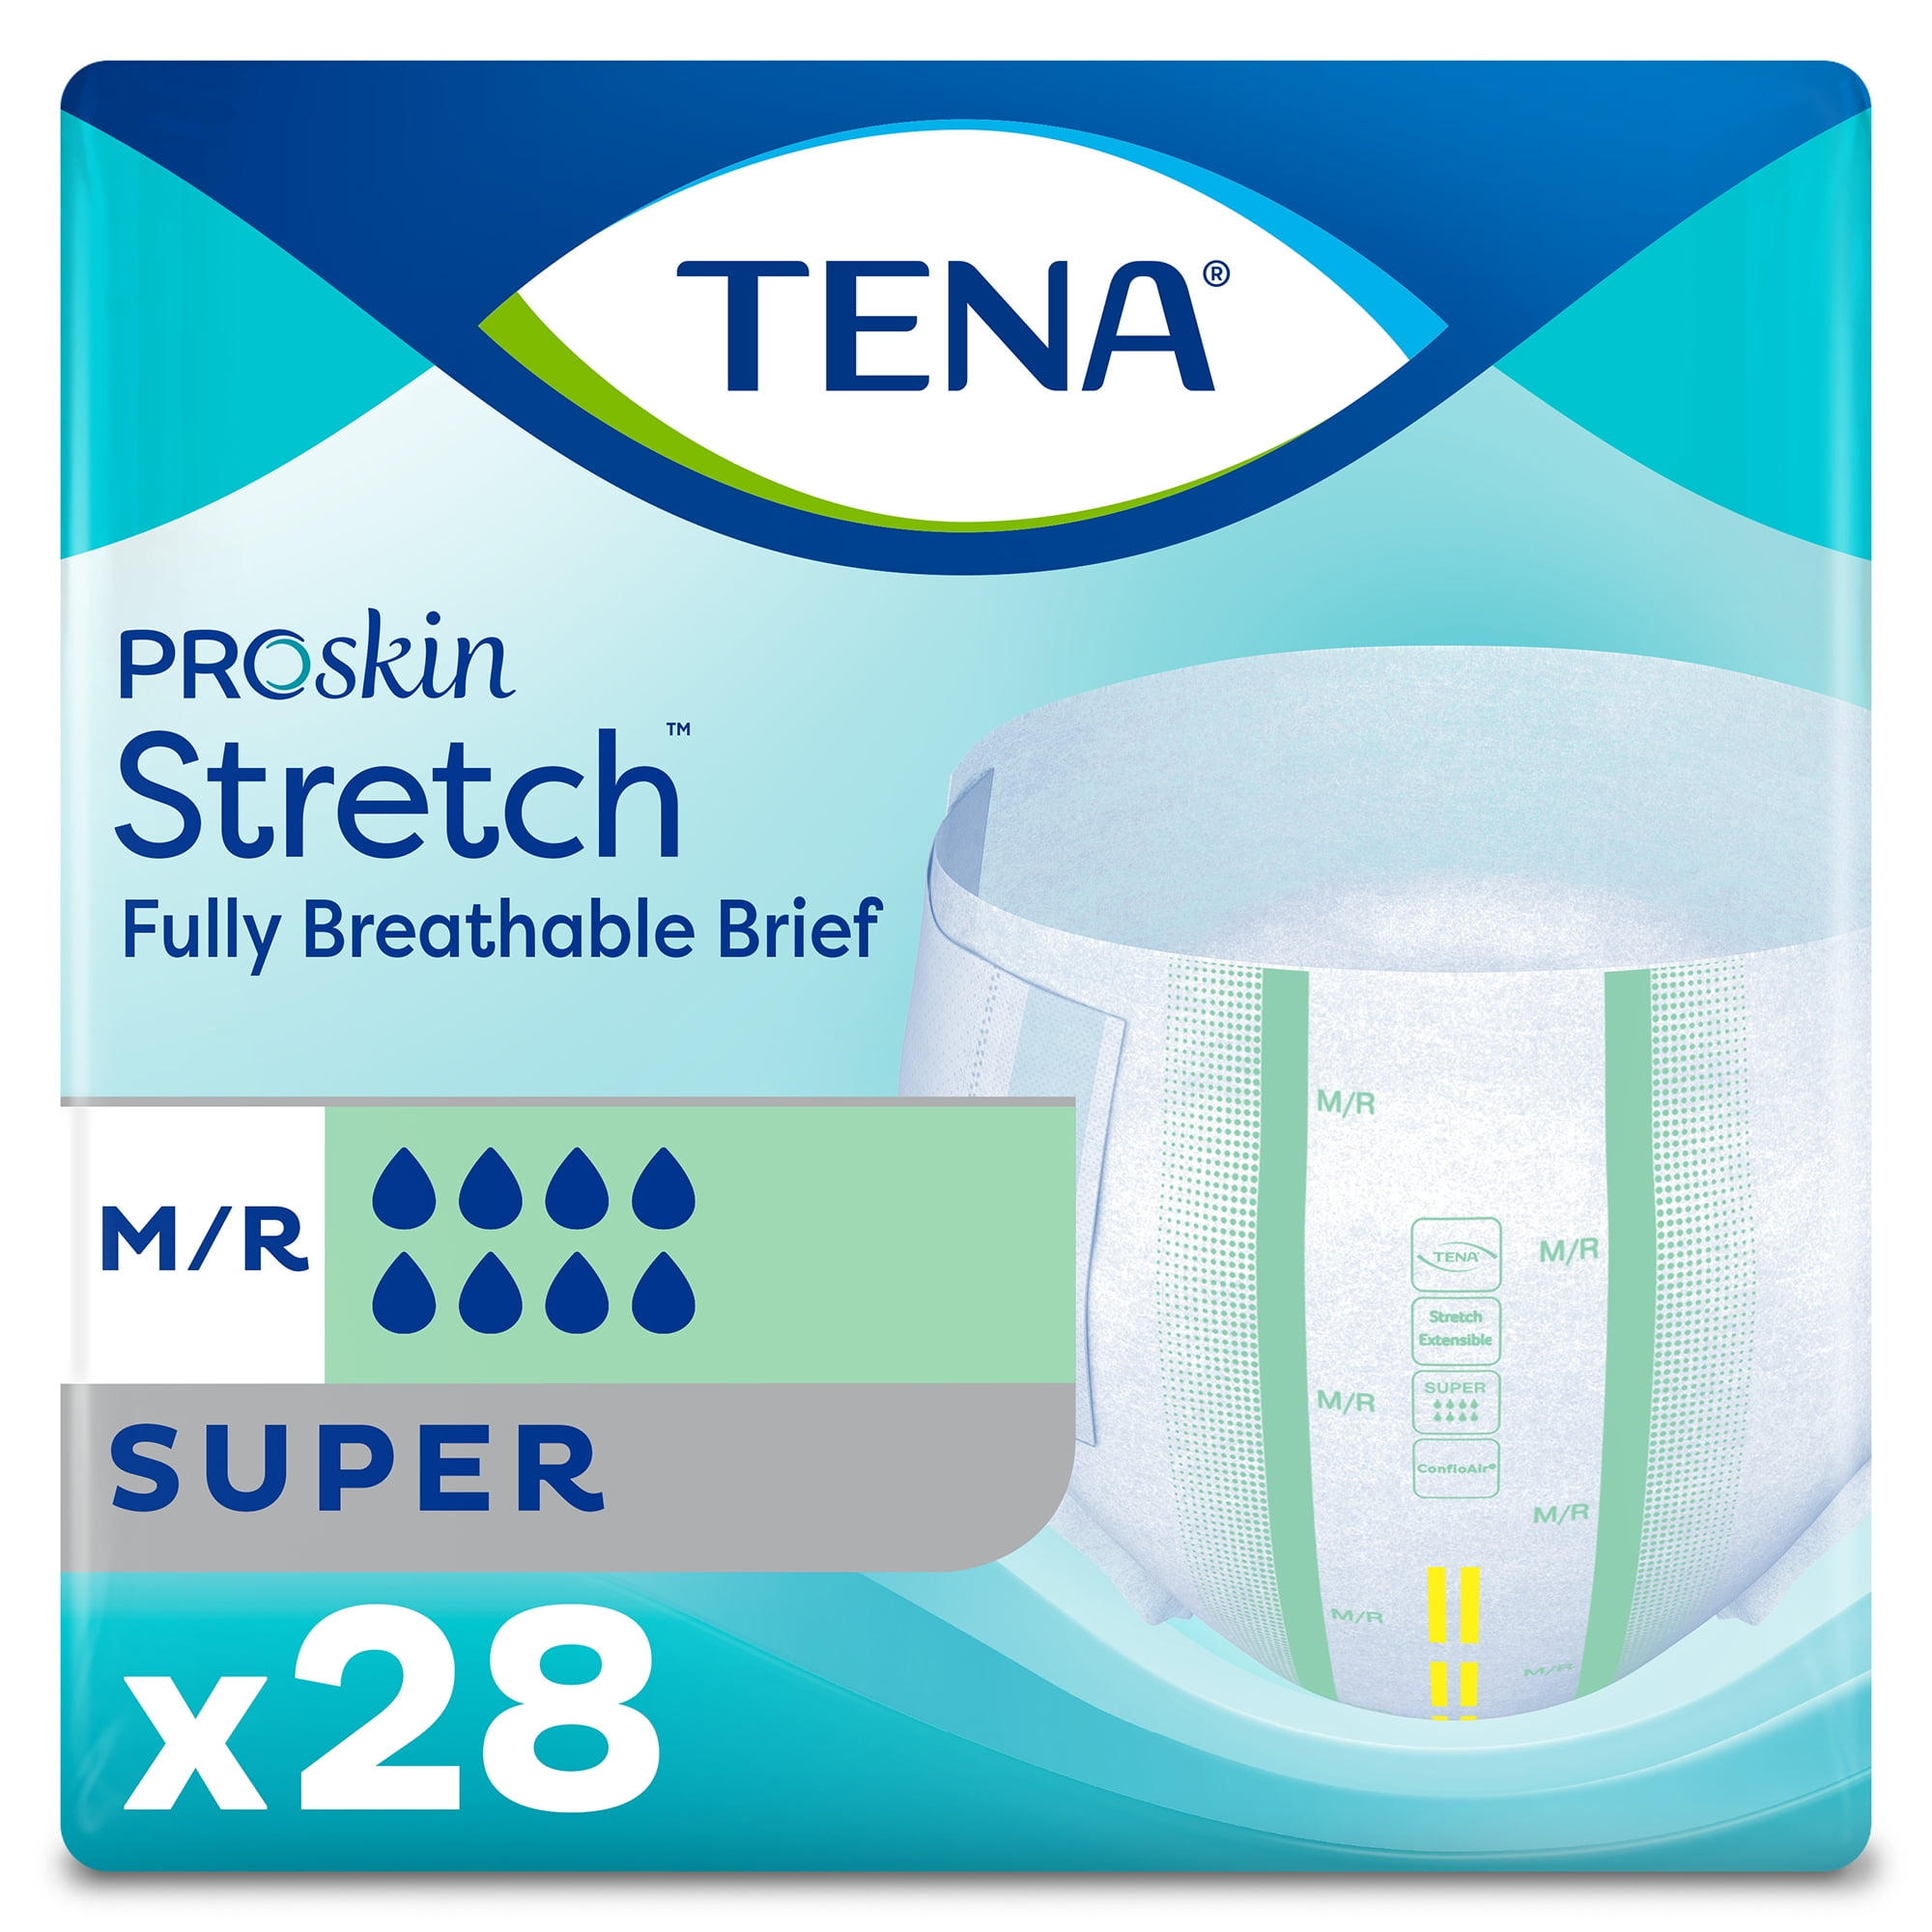 TENA ProSkin Stretch, Unisex Adult Incontinence Brief, Super Absorbency,  Medium, 28 Count, 28 Packs, 28 Total 